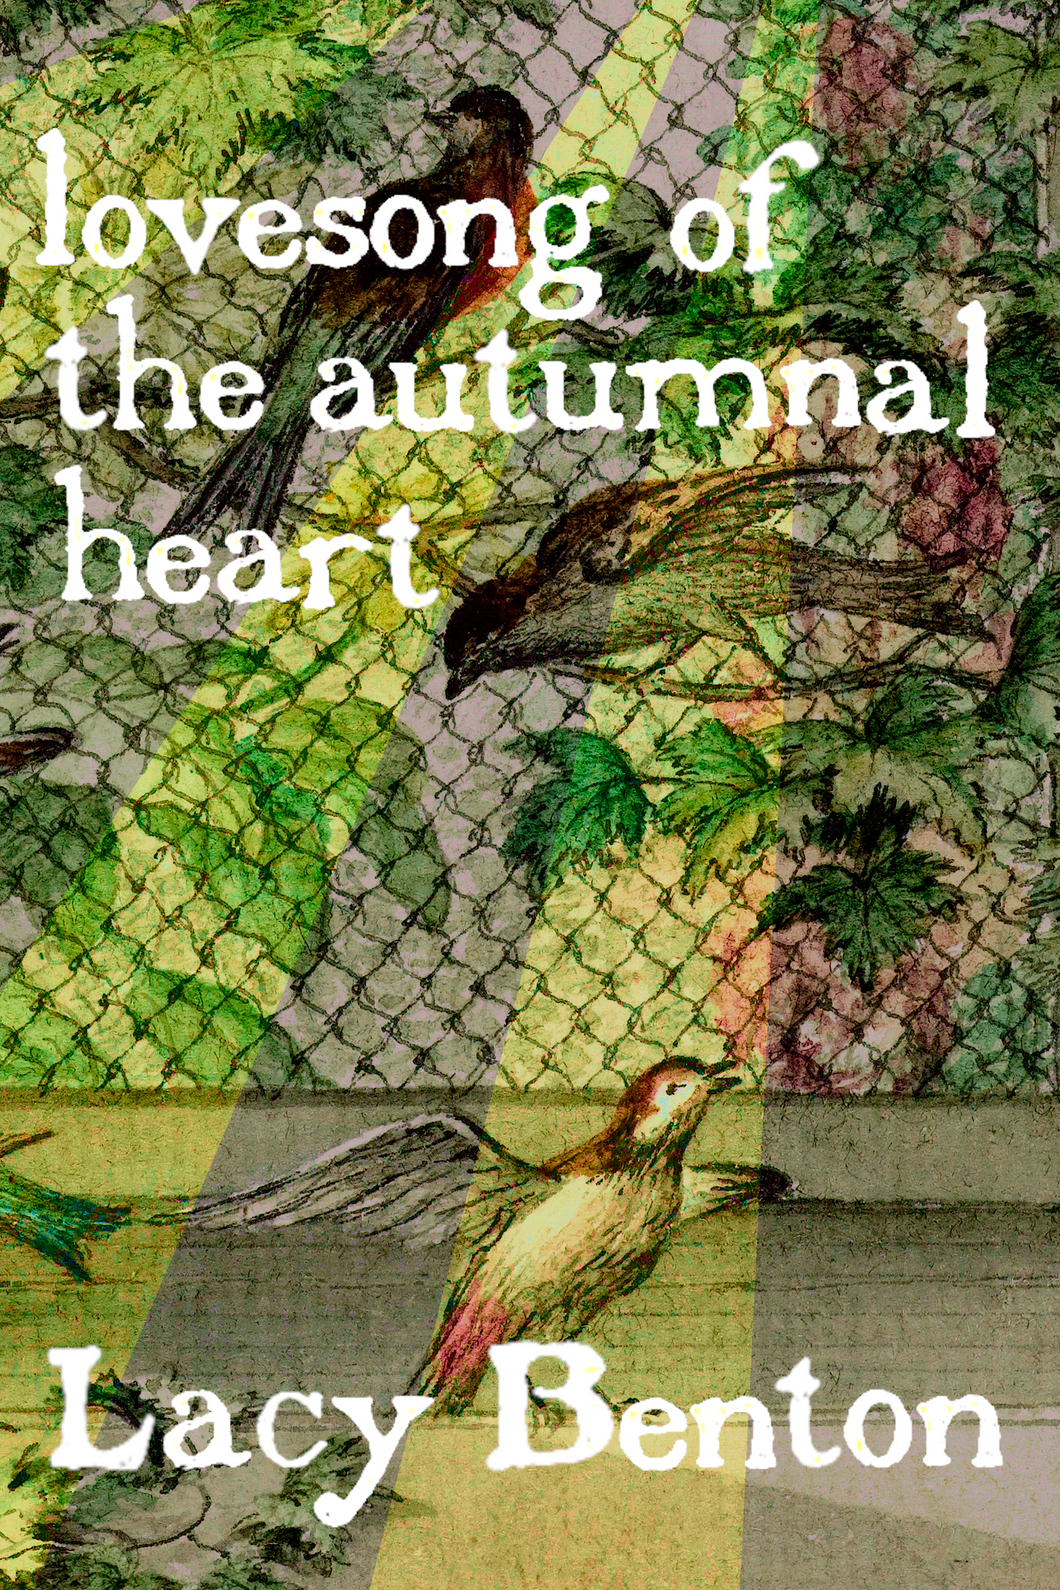 lovesong of the autumnal heart, by Lacy Benton-Print Books-Bottlecap Press